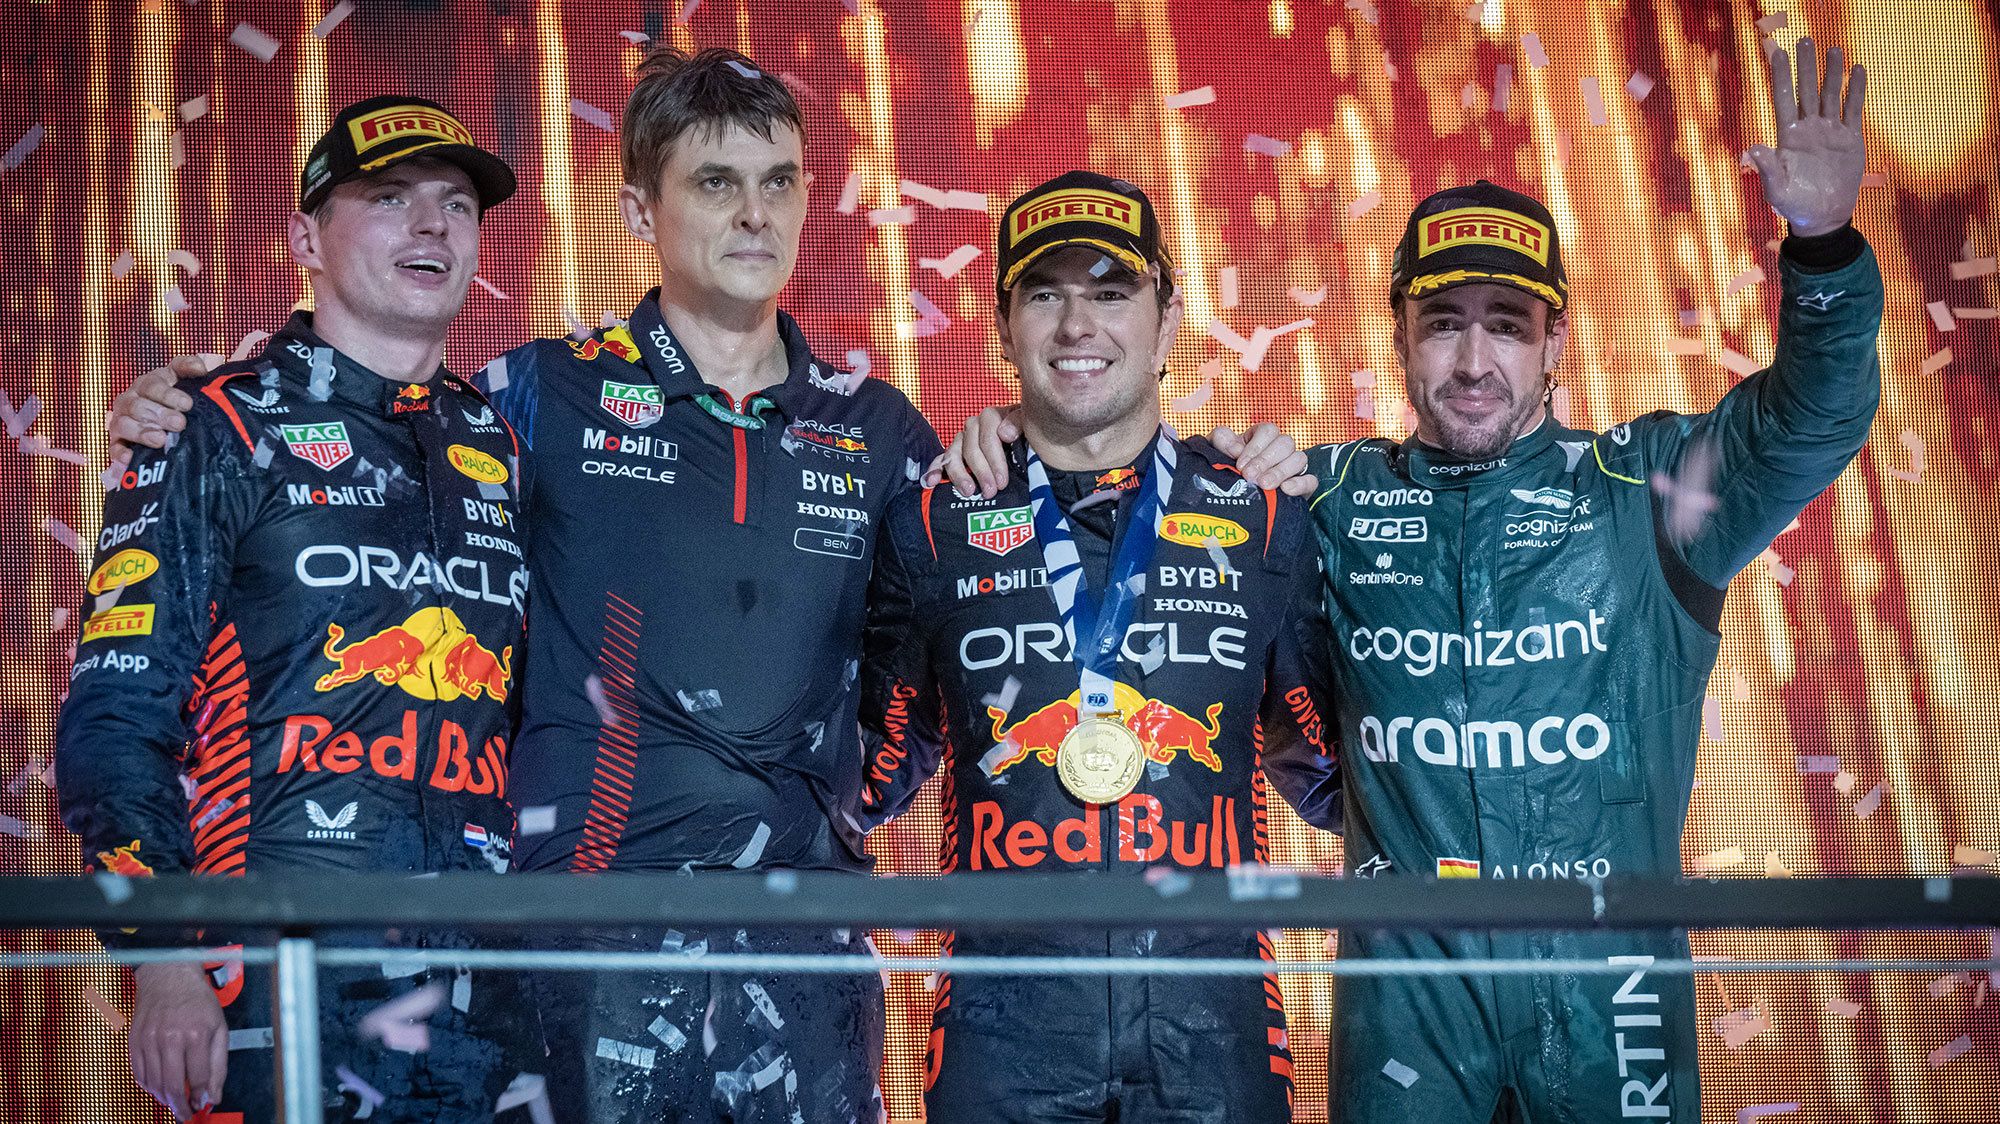 Race winner Sergio Perez, second placed Max Verstappen (L) and third placed Fernando Alonso (R) celebrate on track after the Saudi Arabia Grand Prix.